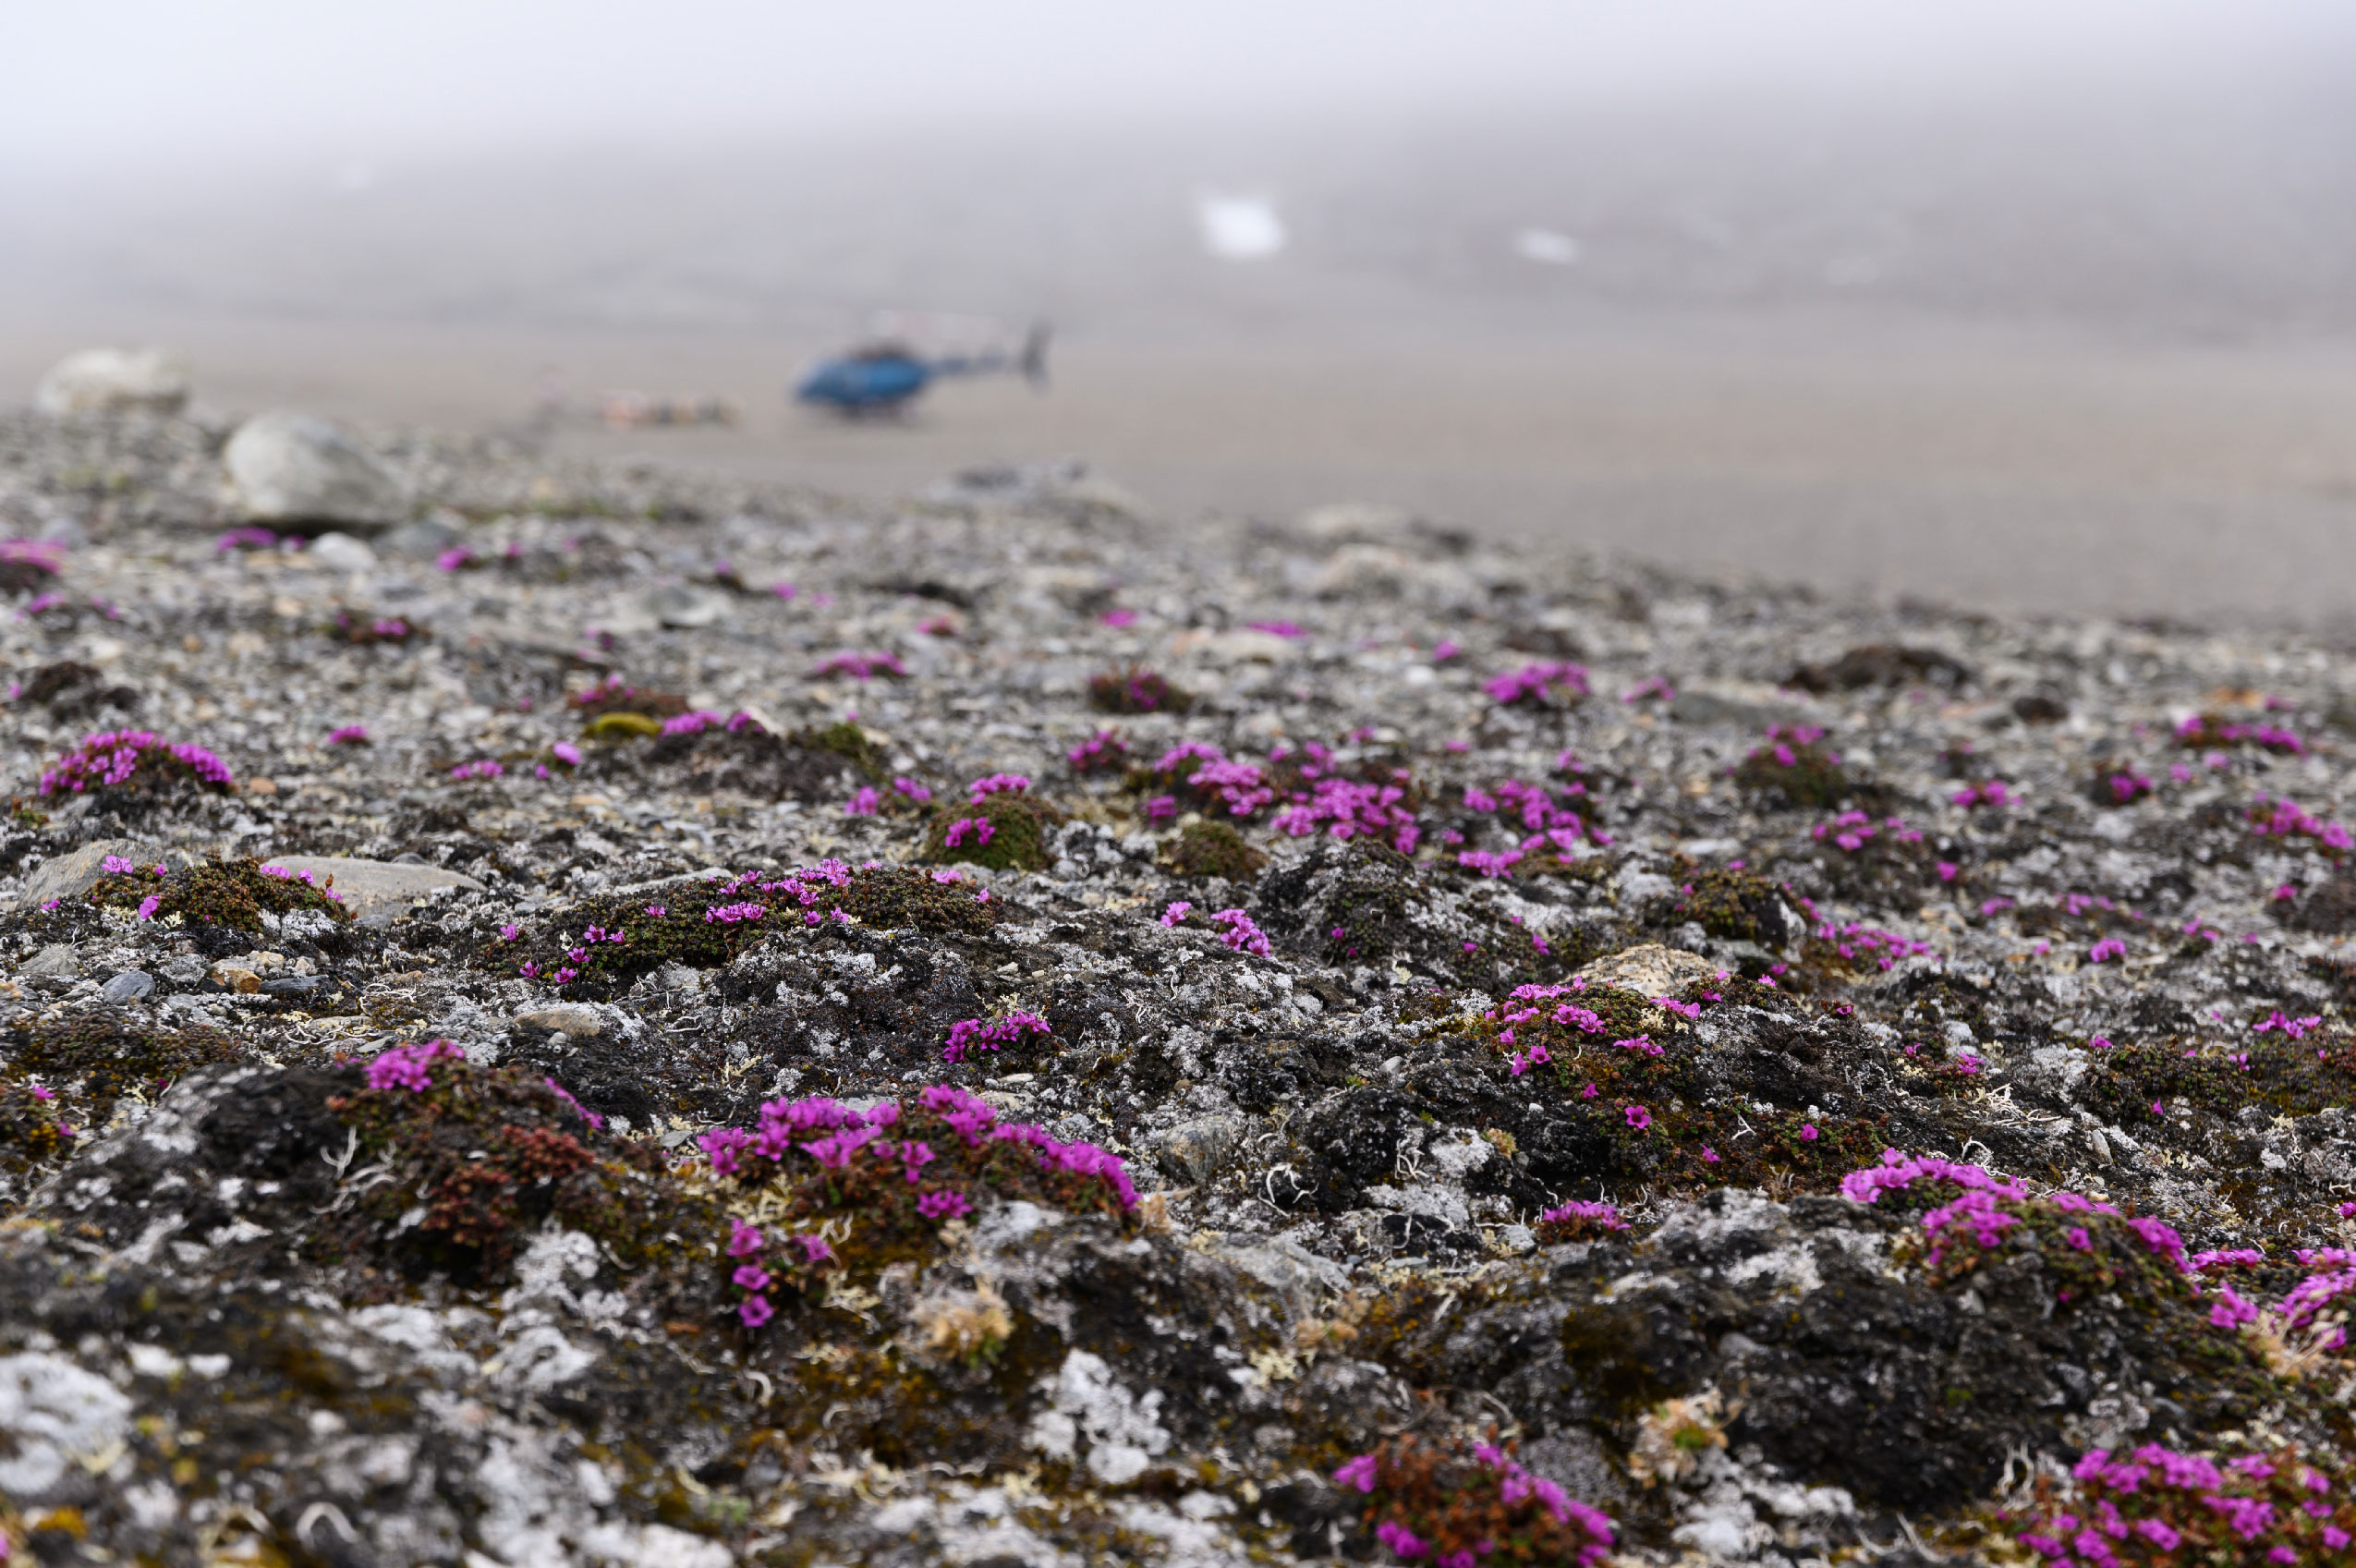 A close-up of purple saxifrage flowers in Purple Valley, a helicopter and fog are in the distance.